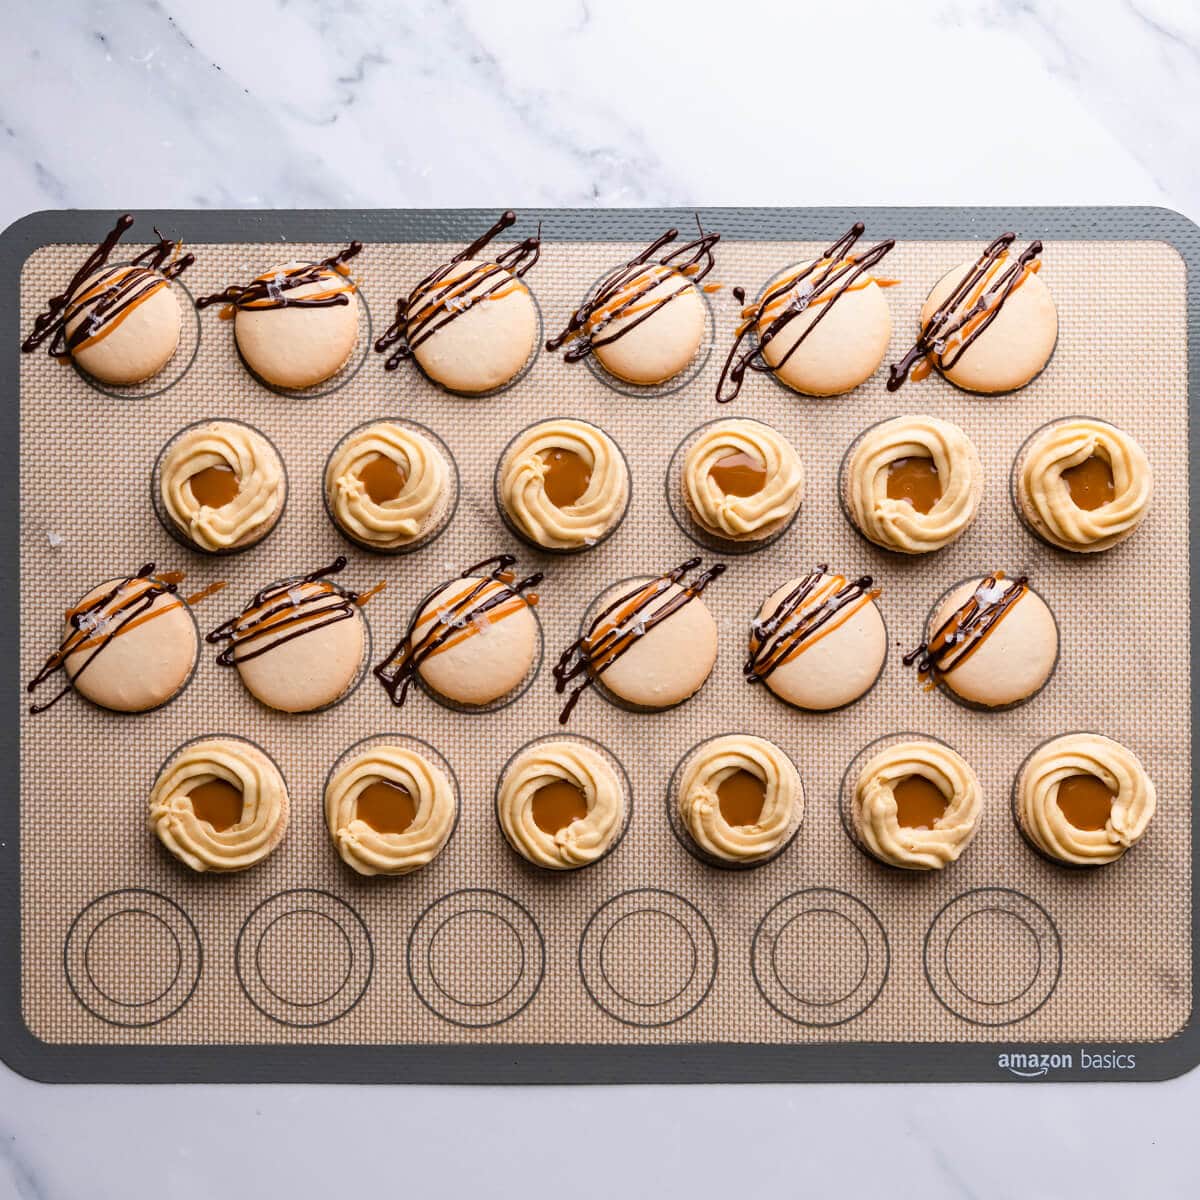 salted caramel macarons shells with chocolate and caramel drizzle and buttercream filling.